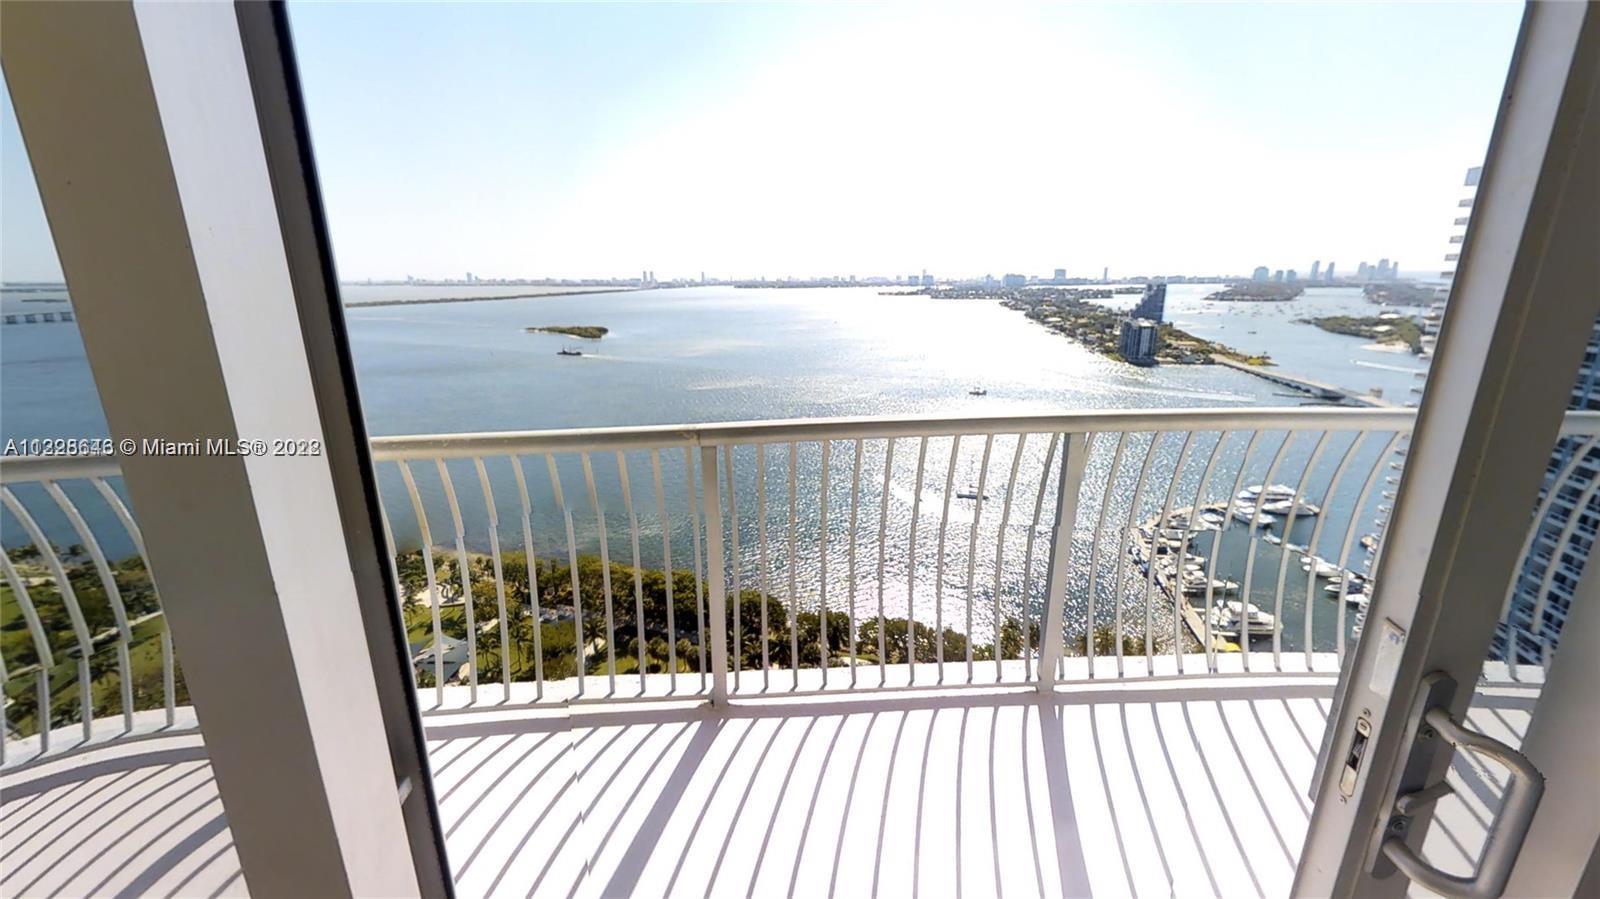 Breathtaking unobstructed and wide-open views of the bay, miami beach skyline, and the ocean. Luxury